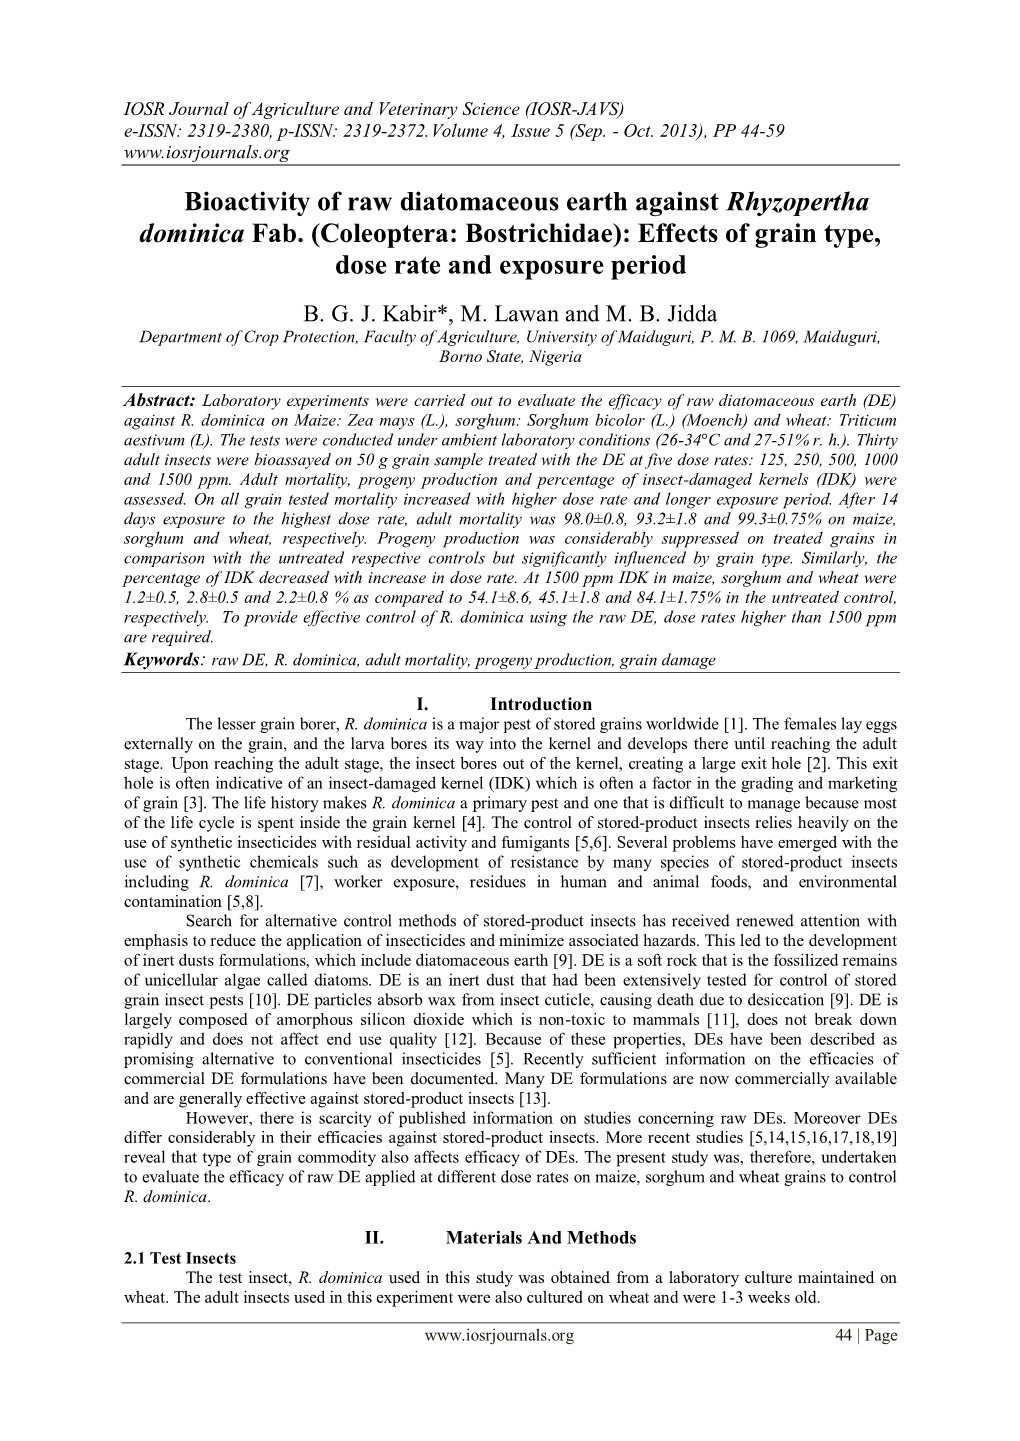 Bioactivity of Raw Diatomaceous Earth Against Rhyzopertha Dominica Fab. (Coleoptera: Bostrichidae): Effects of Grain Type, Dose Rate and Exposure Period